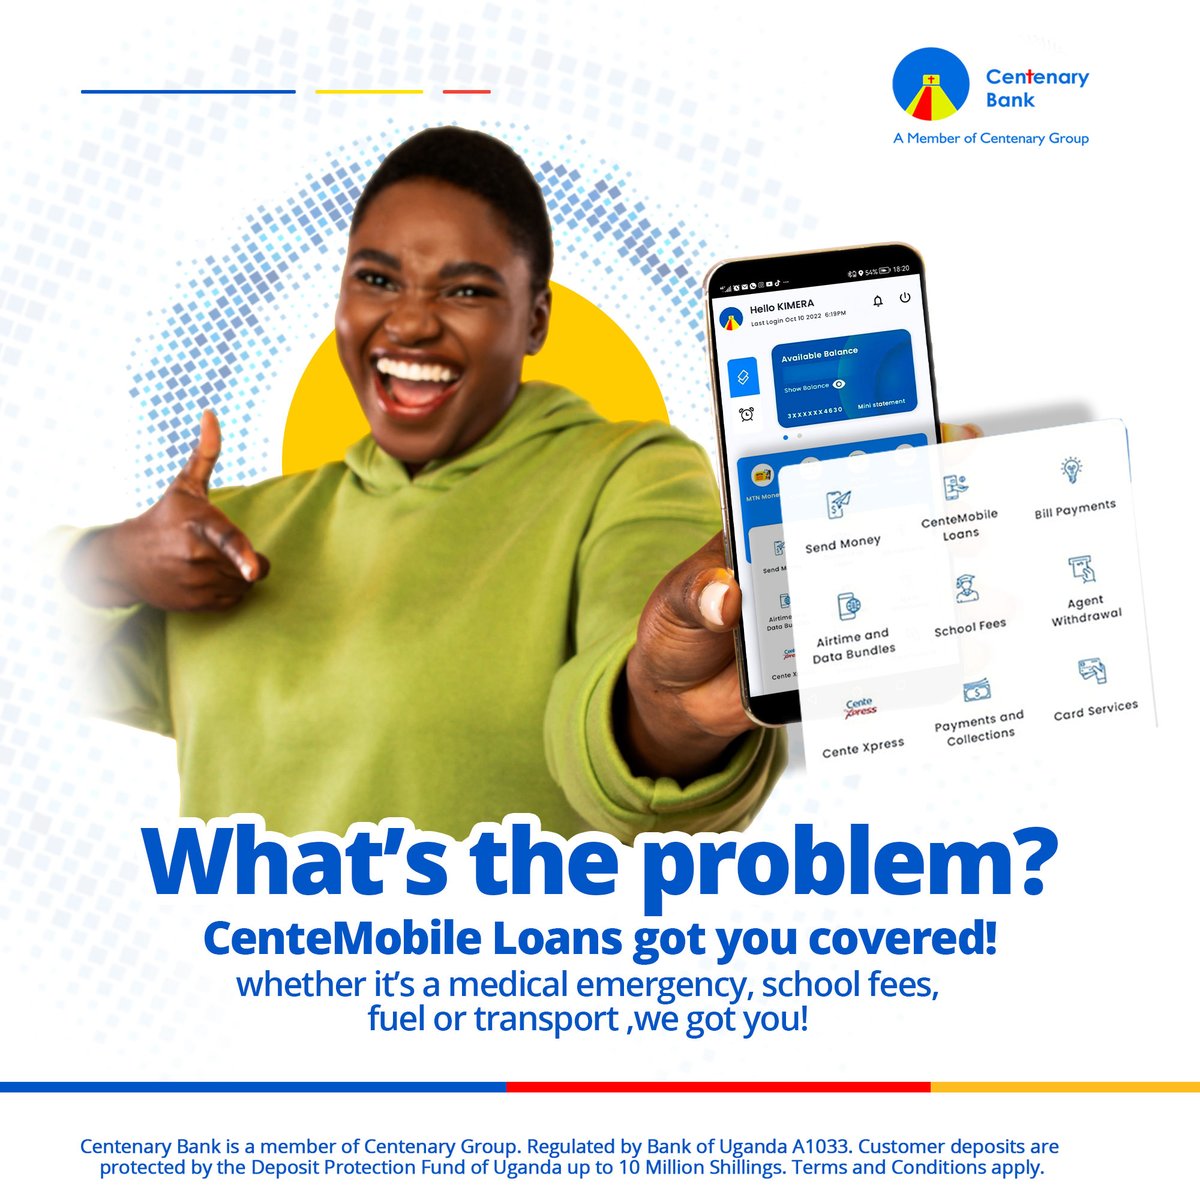 Life's unexpected expenses? No problem! With our Cente Mobile Loan, you can get the financial assistance you need, anytime, anywhere. Apply today and enjoy a peace of mind. #CenteMobileLoan #FinancialSupport Links Android: bit.ly/3DAeLSTIOS: apple.co/3zIvAKn